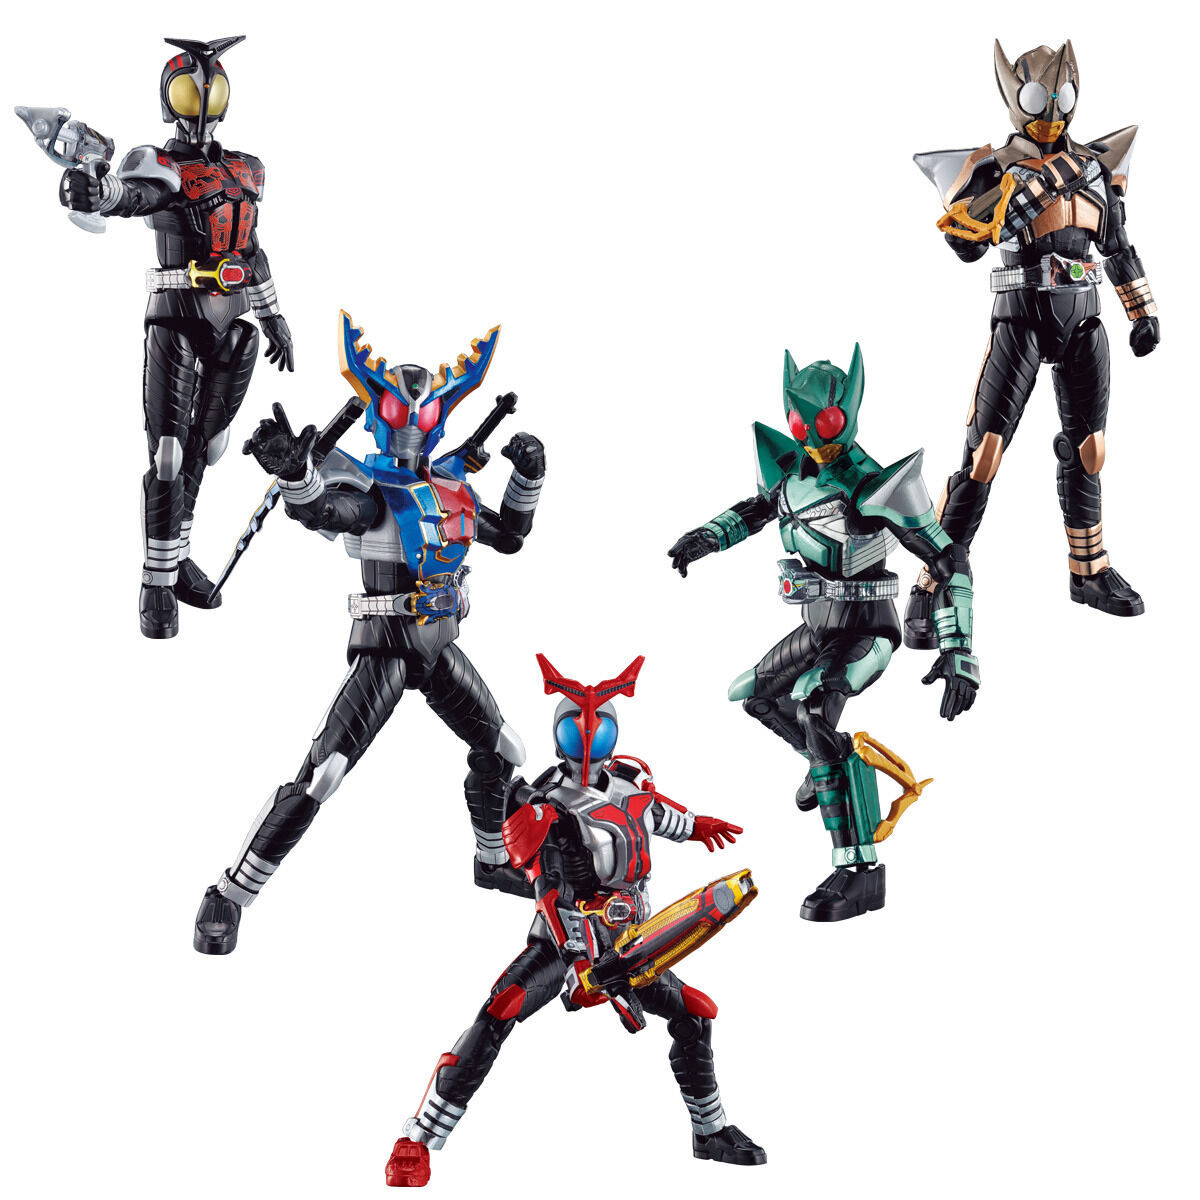 SO-DO CHRONICLE 仮面ライダーカブト2(10個入) | 仮面ライダーカブト フィギュア・プラモデル・プラキット |  バンダイナムコグループ公式通販サイト